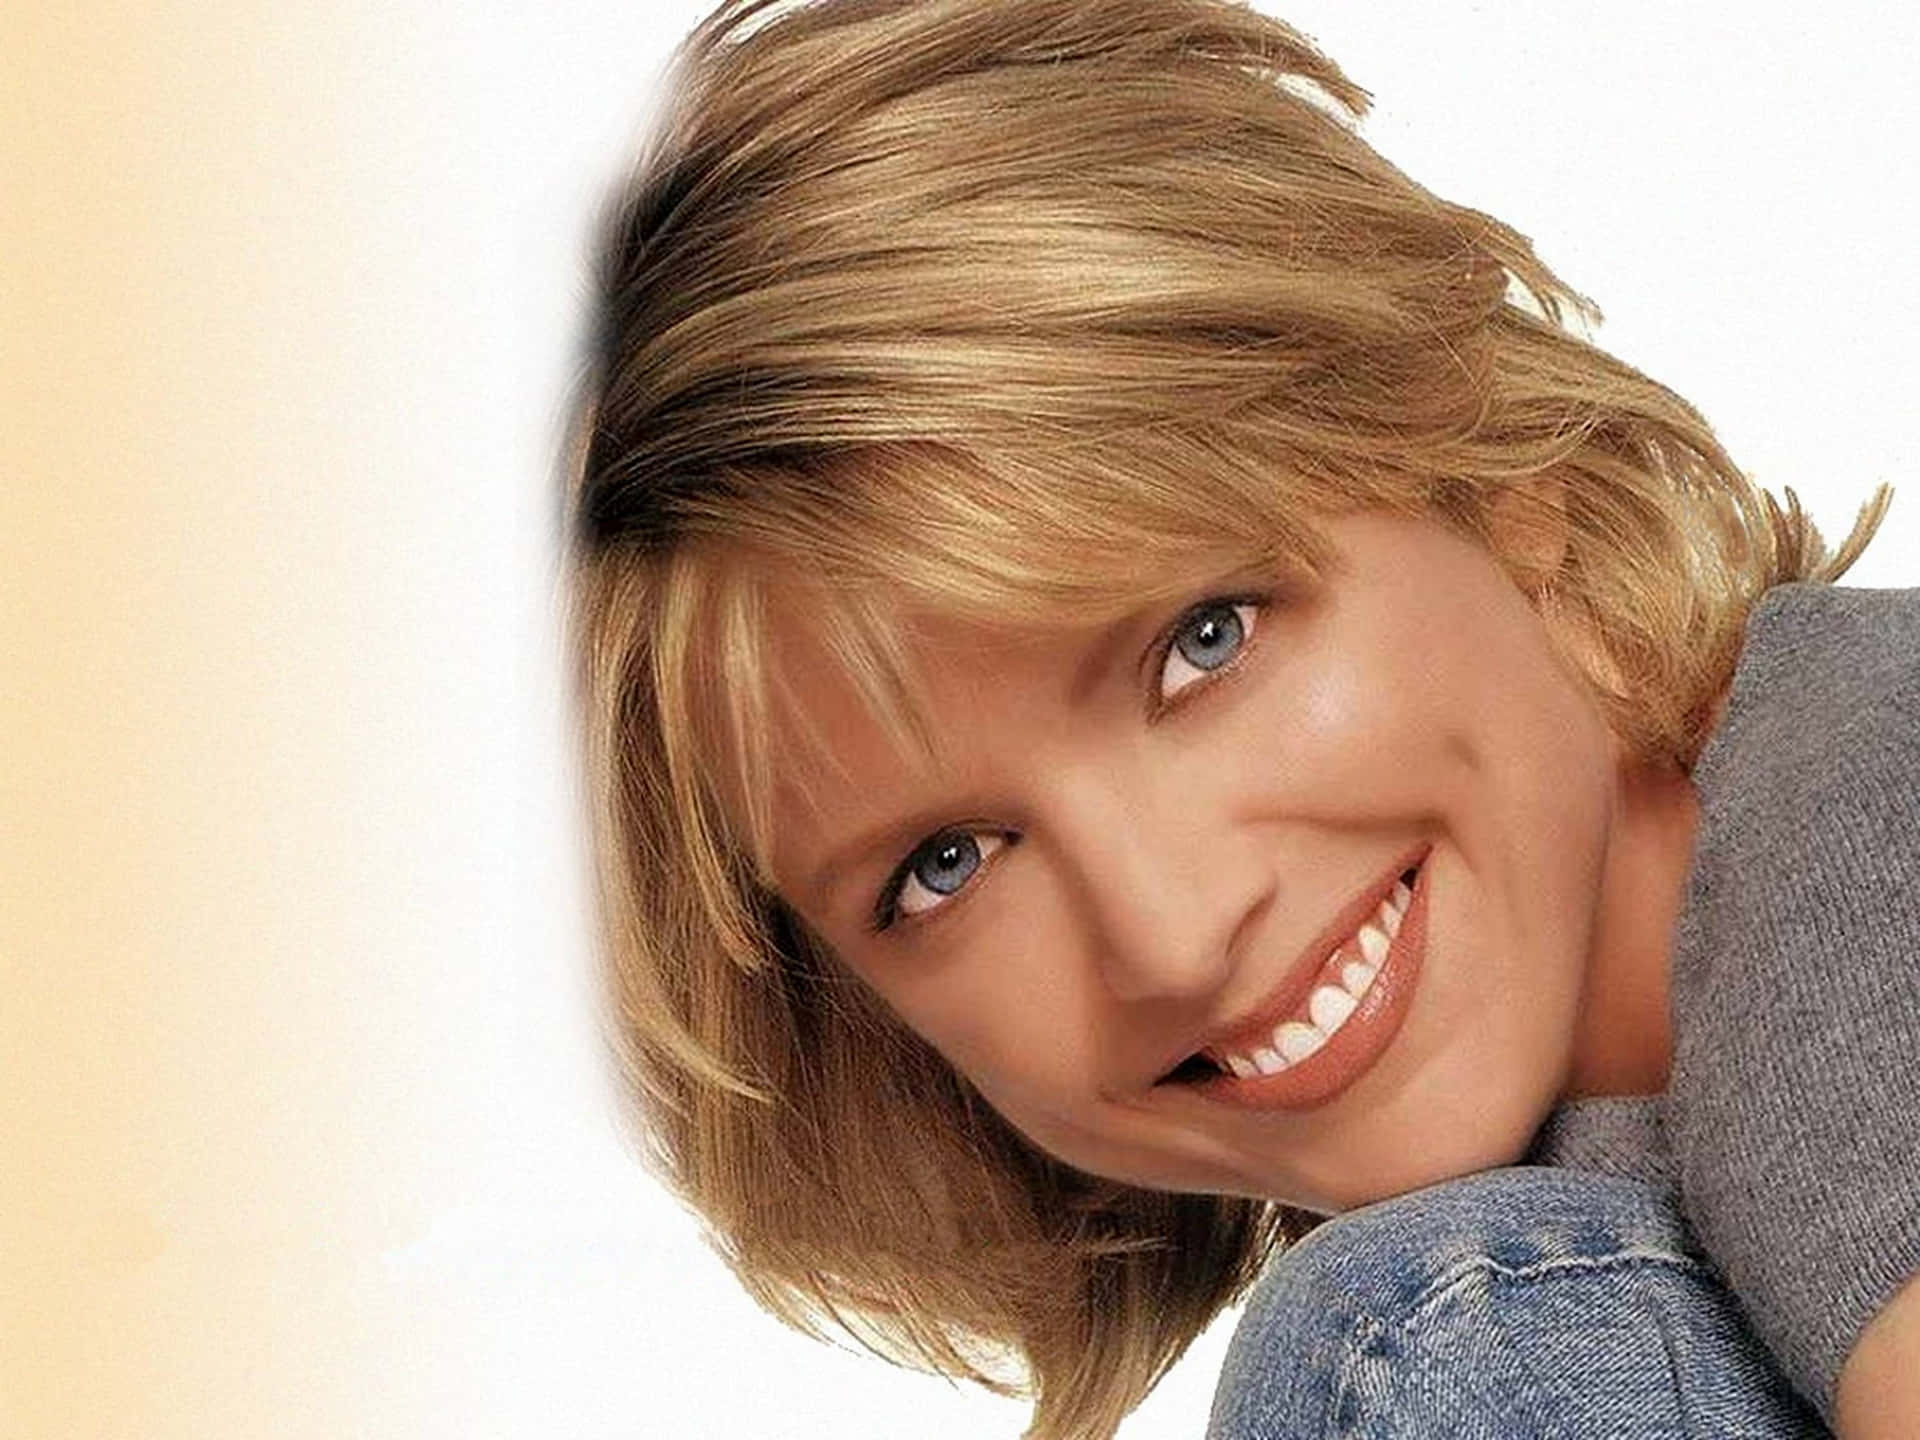 Stunning Courtney Thorne Smith posing in a photoshoot Wallpaper